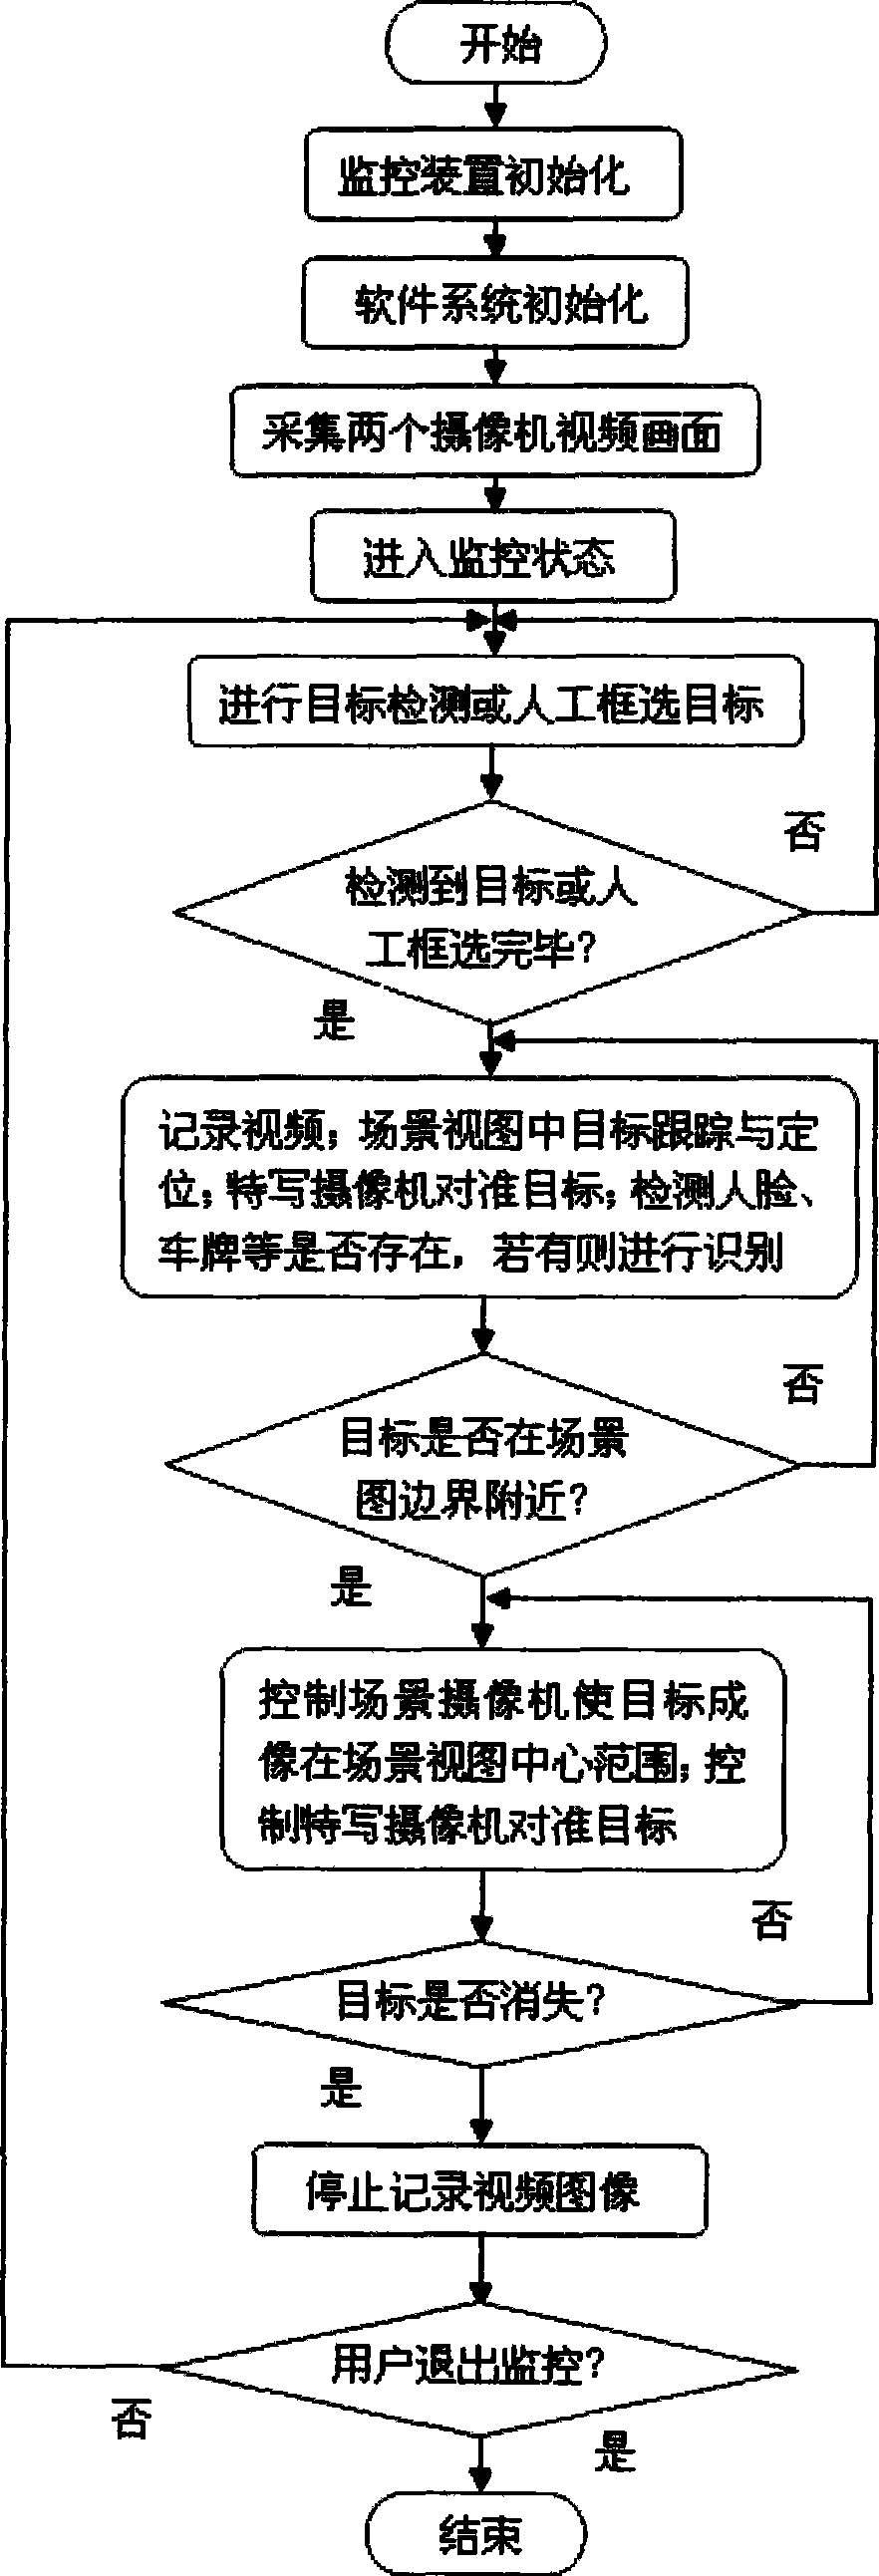 Video monitoring device and tracking and recording method based on linkage camera